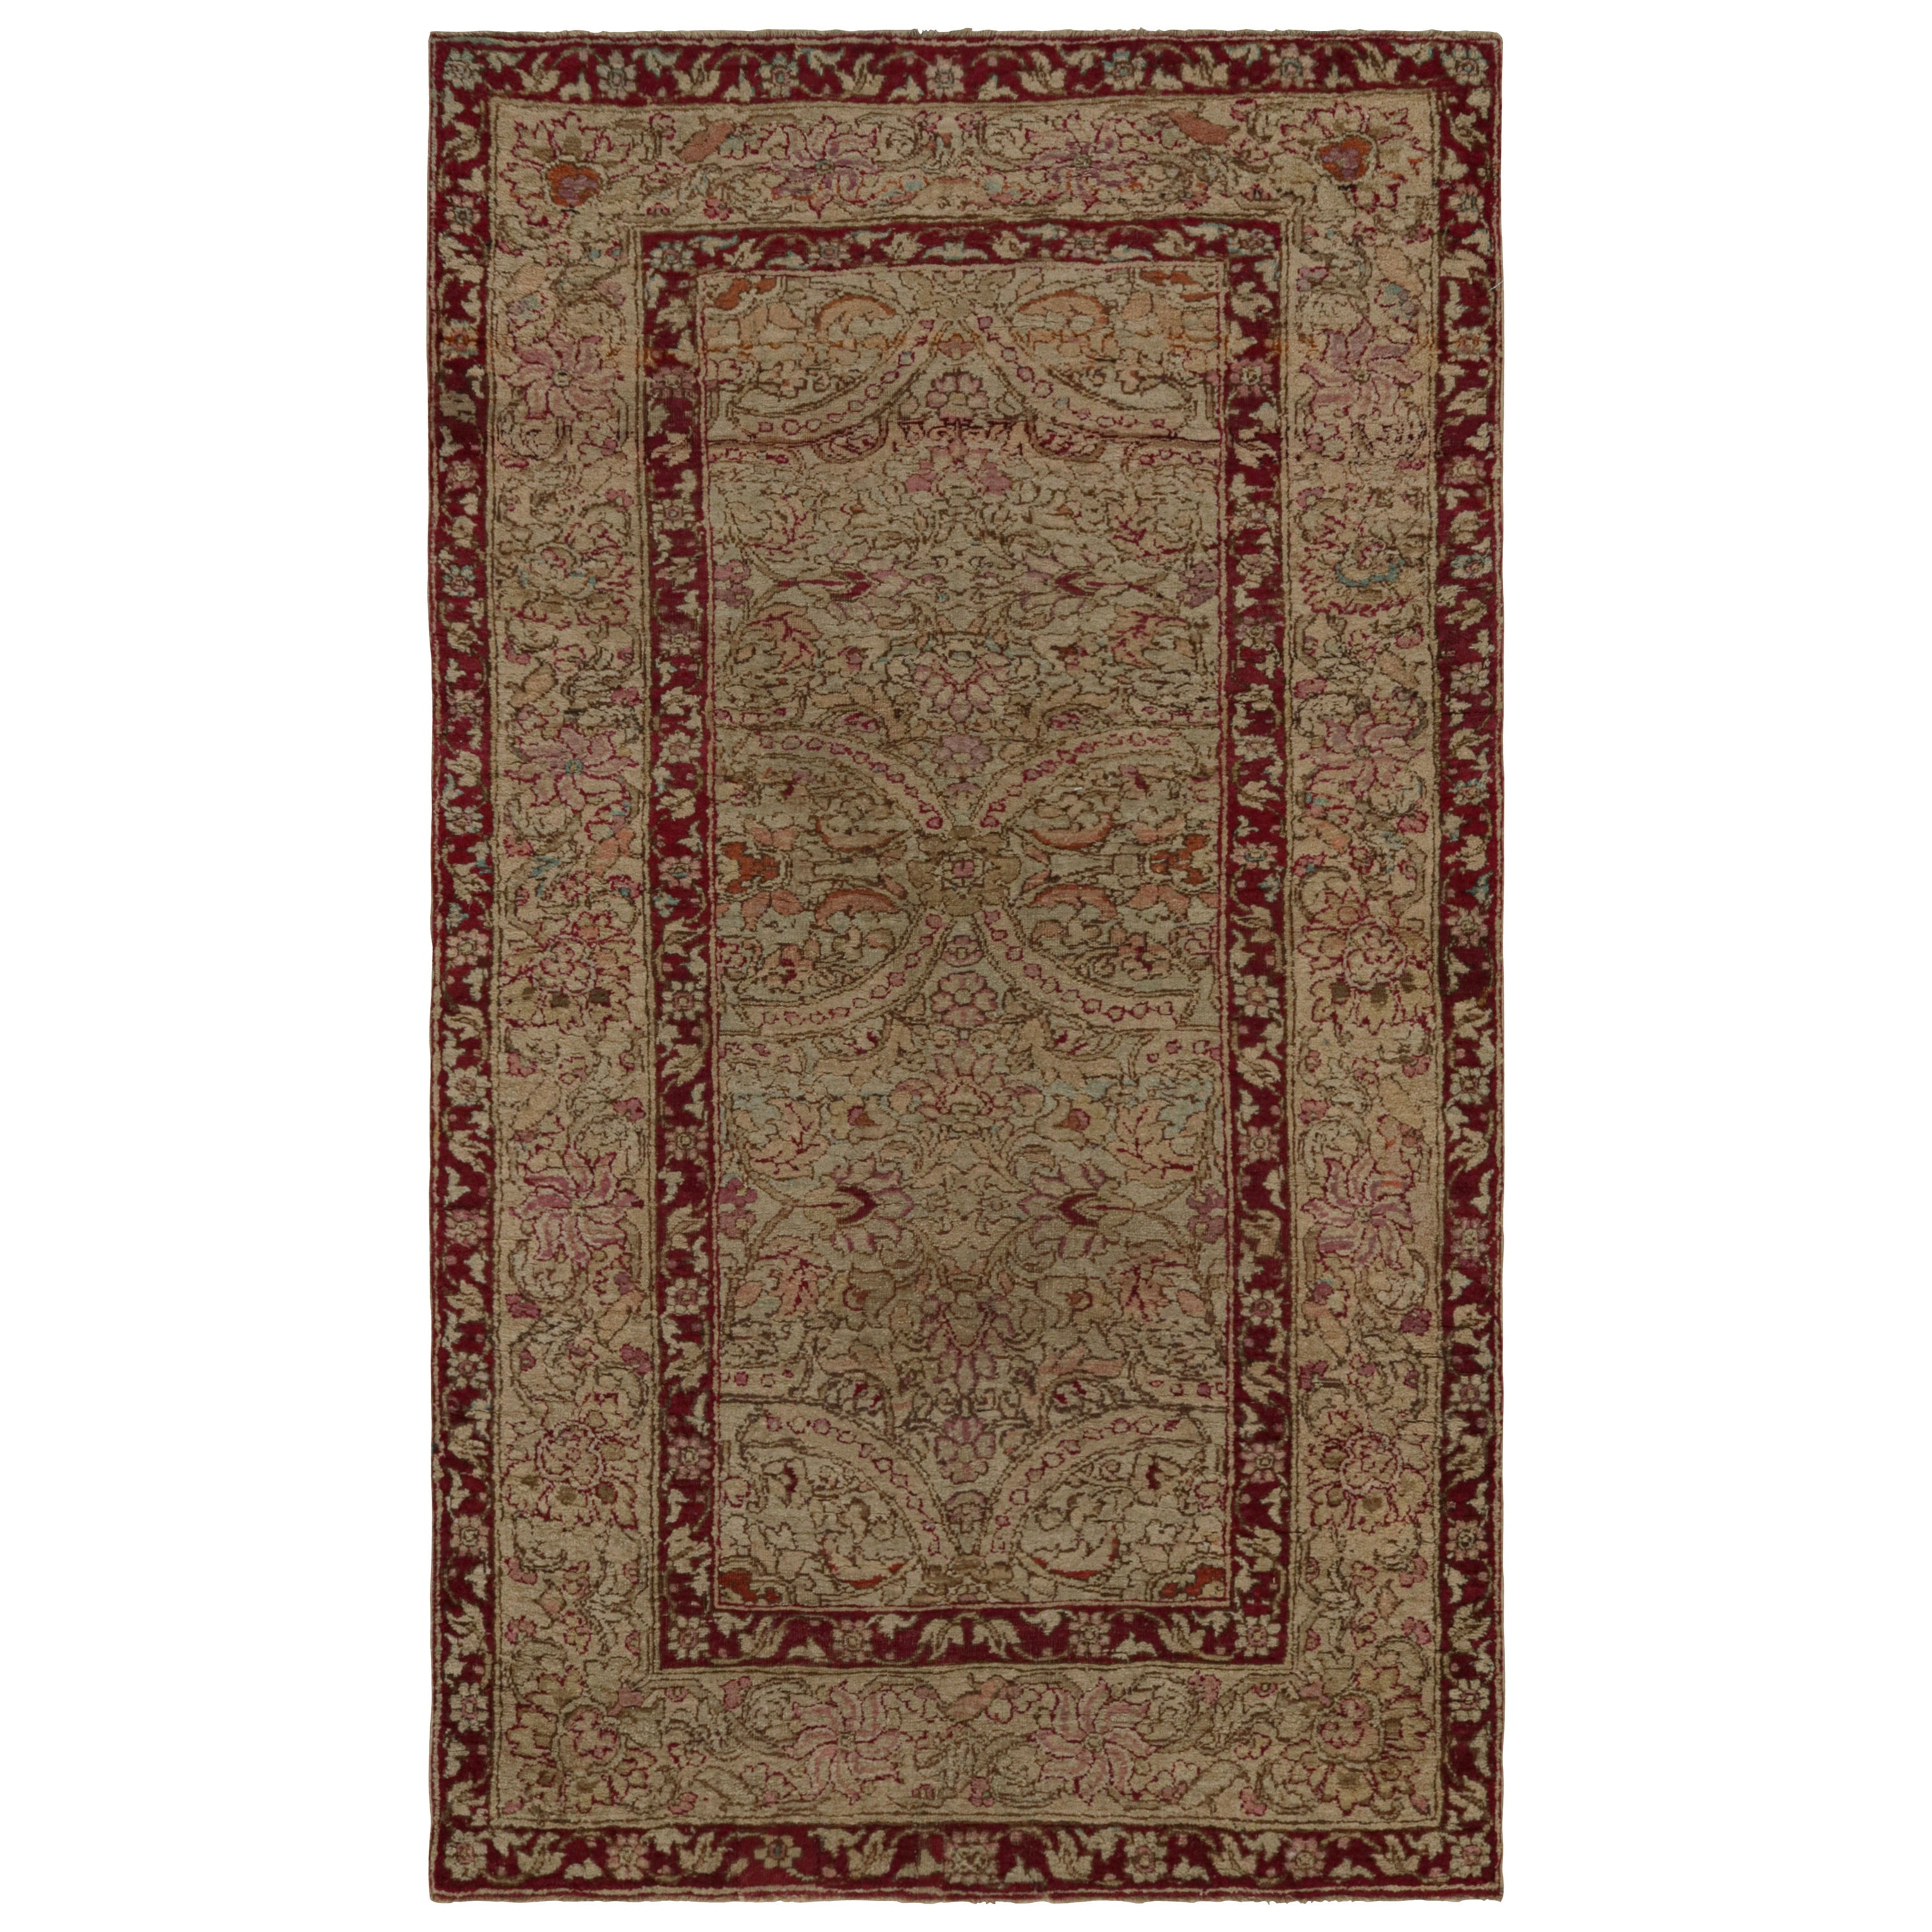 Antique Agra rug with Geometric Patterns in Brown and Red, from Rug & Kilim